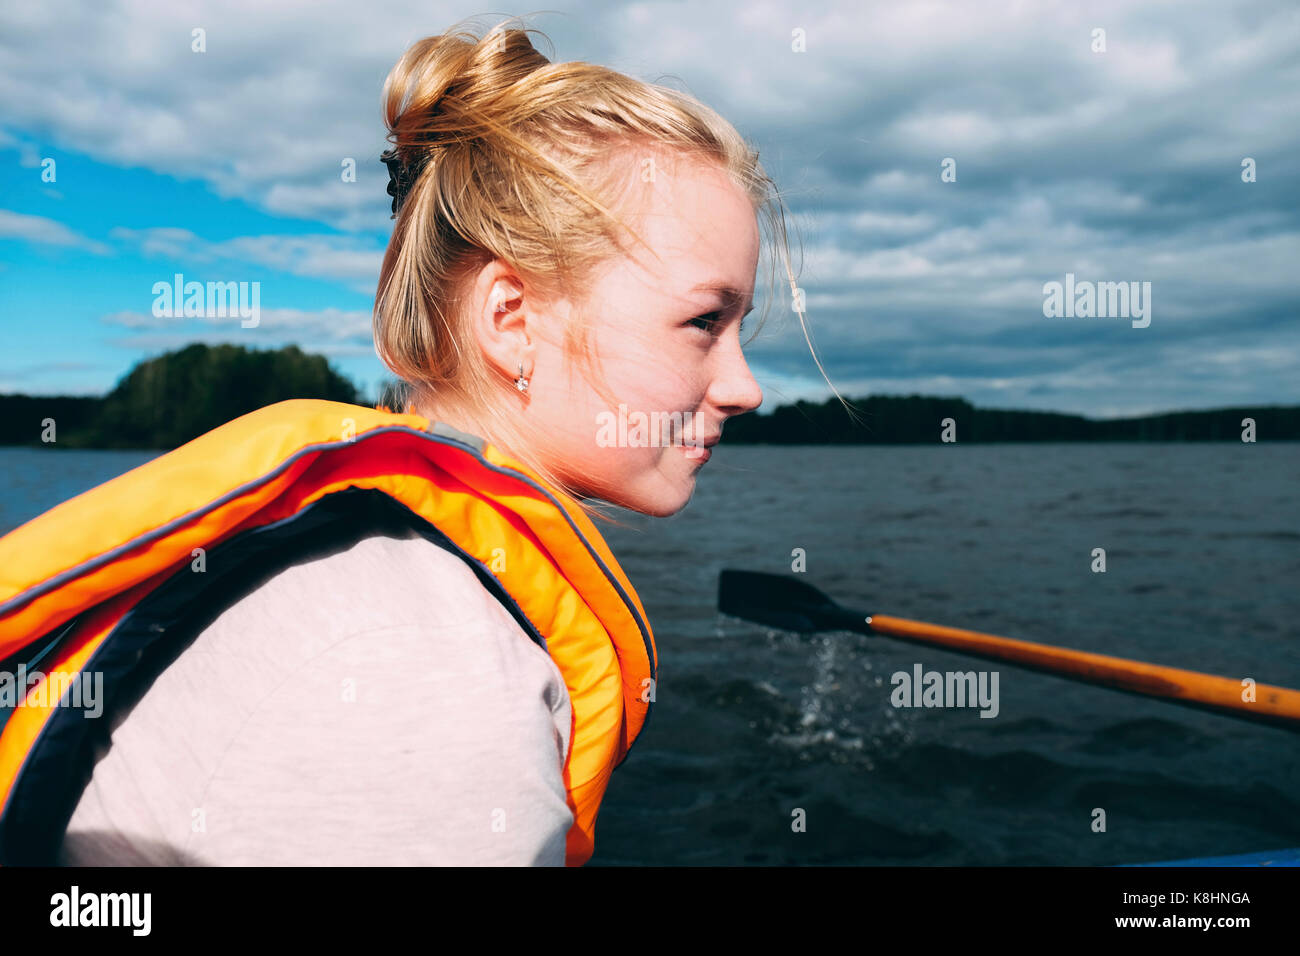 Side view of woman canoeing on sea against cloudy sky Stock Photo